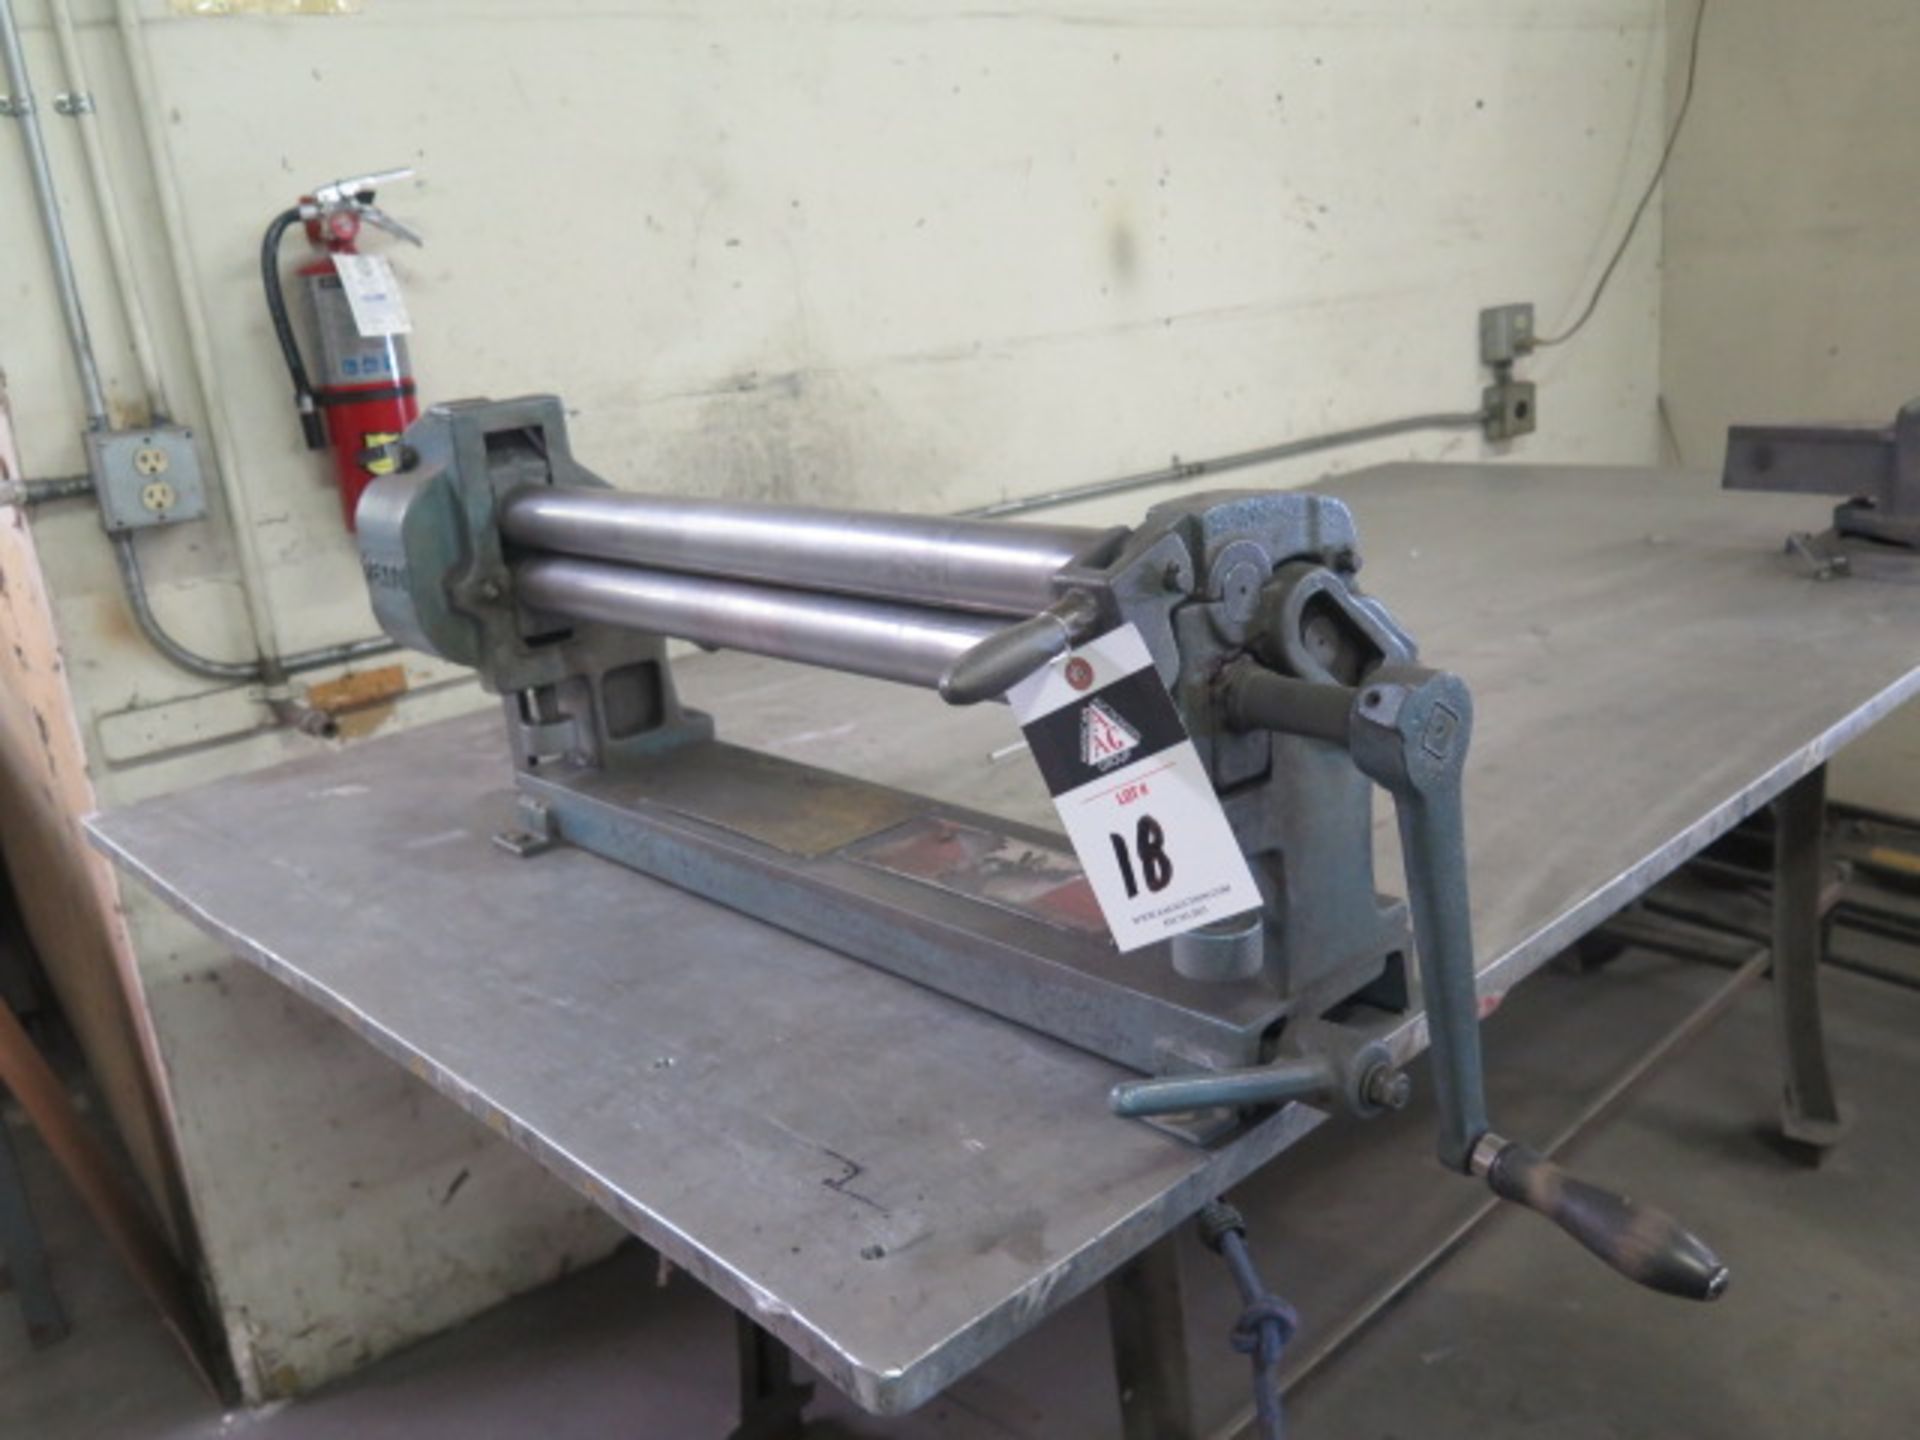 Pexto mdl. 383D 36" Hand Roll w/ 2" Rolls, Eron 6" Bench Vise w/ 48" x 80" x 3/4" Table, SOLD AS IS - Image 3 of 9